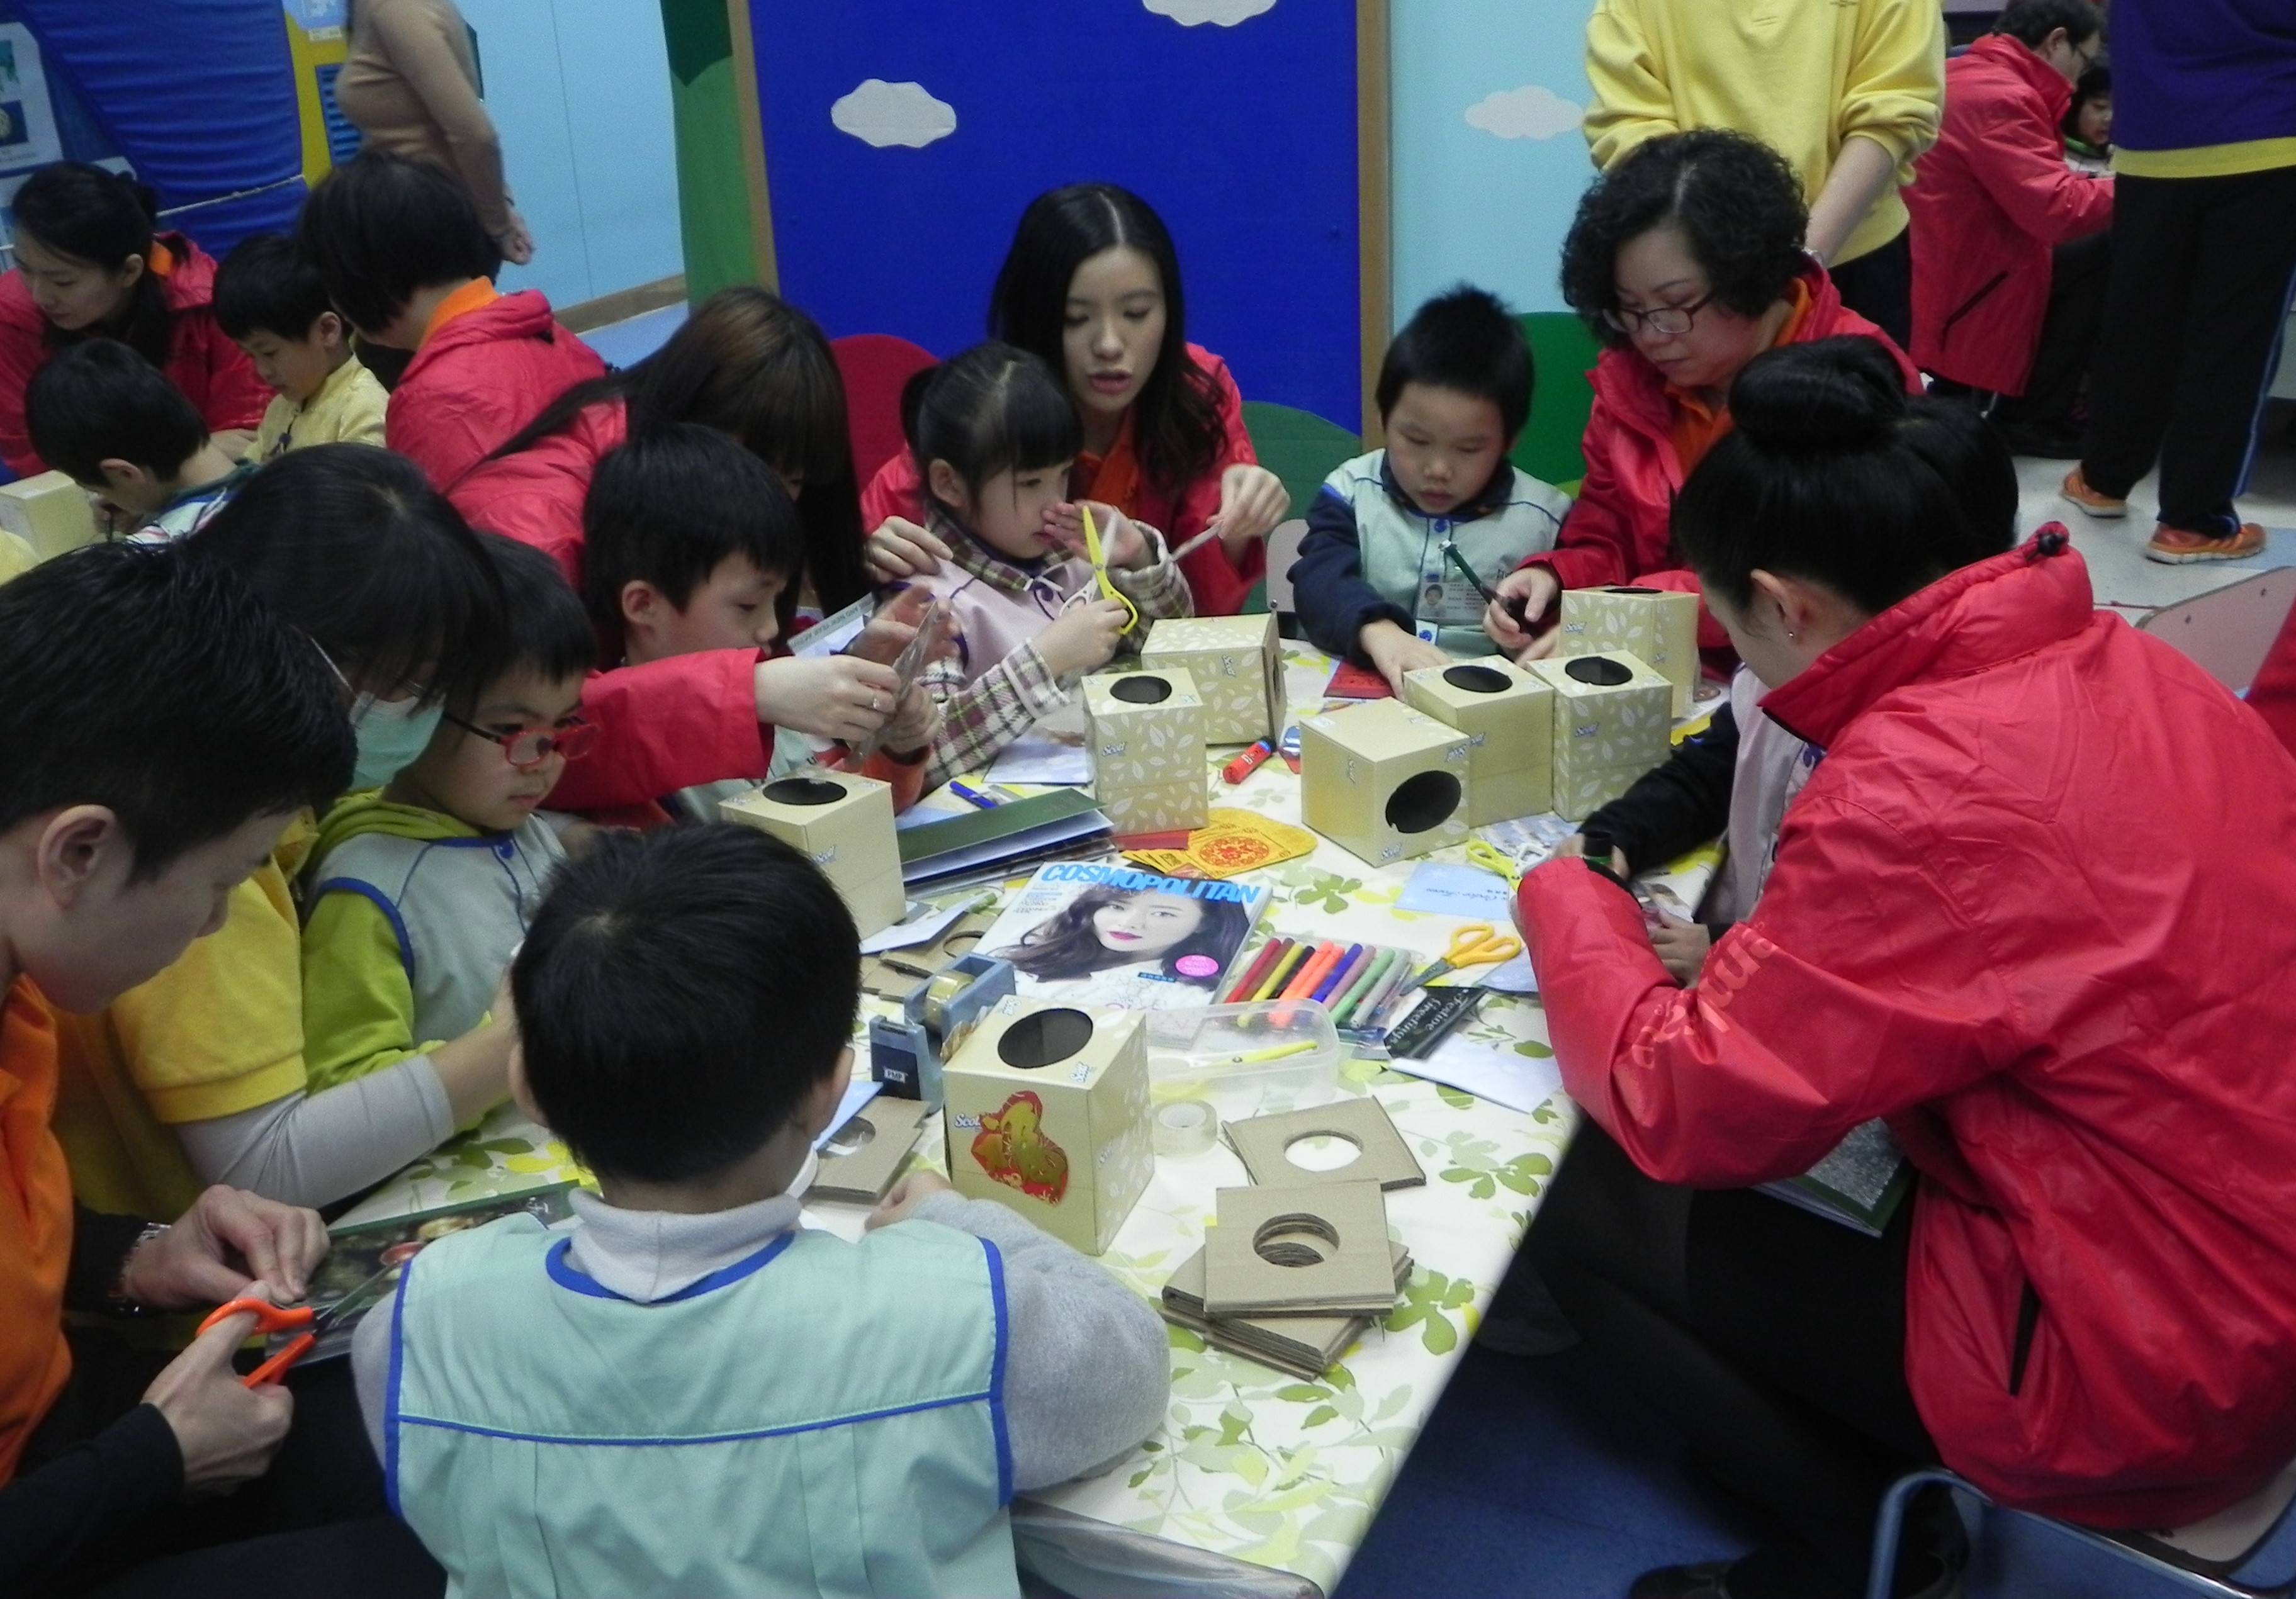 Island Shangri-La, Hong Kong, participated in the ‘Love our planet’ activity at Chan Chung Hon Centre